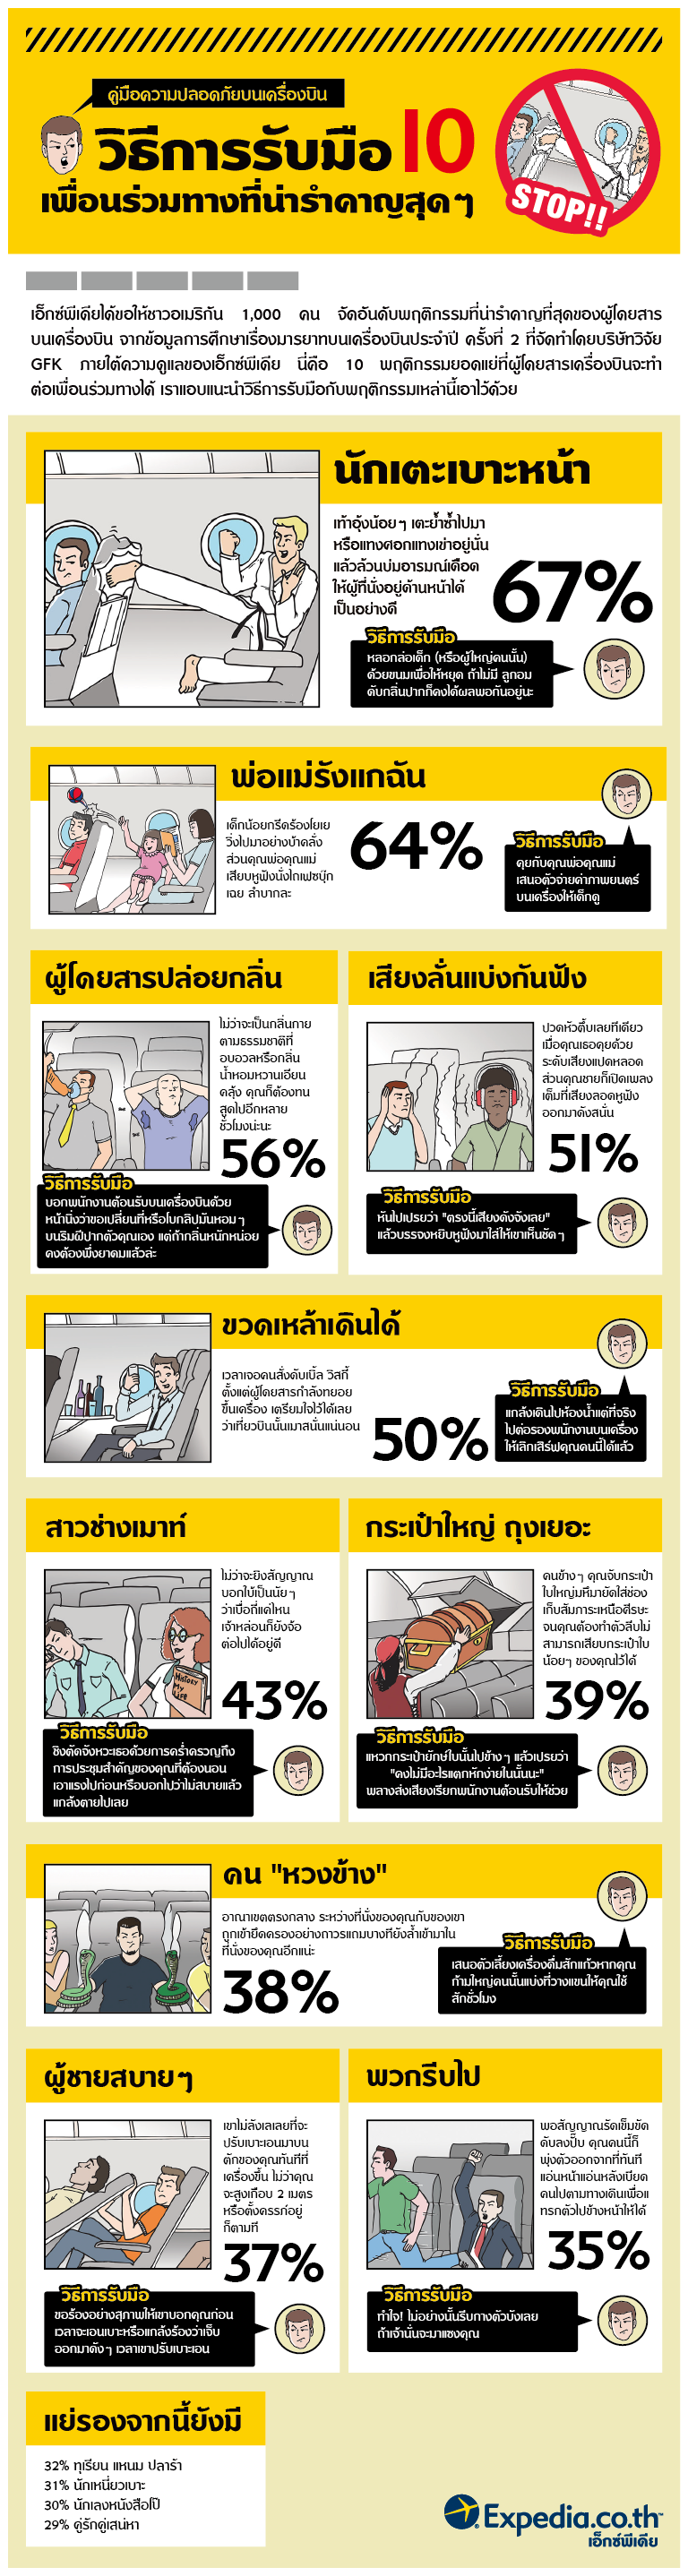 FlightSafety infographic